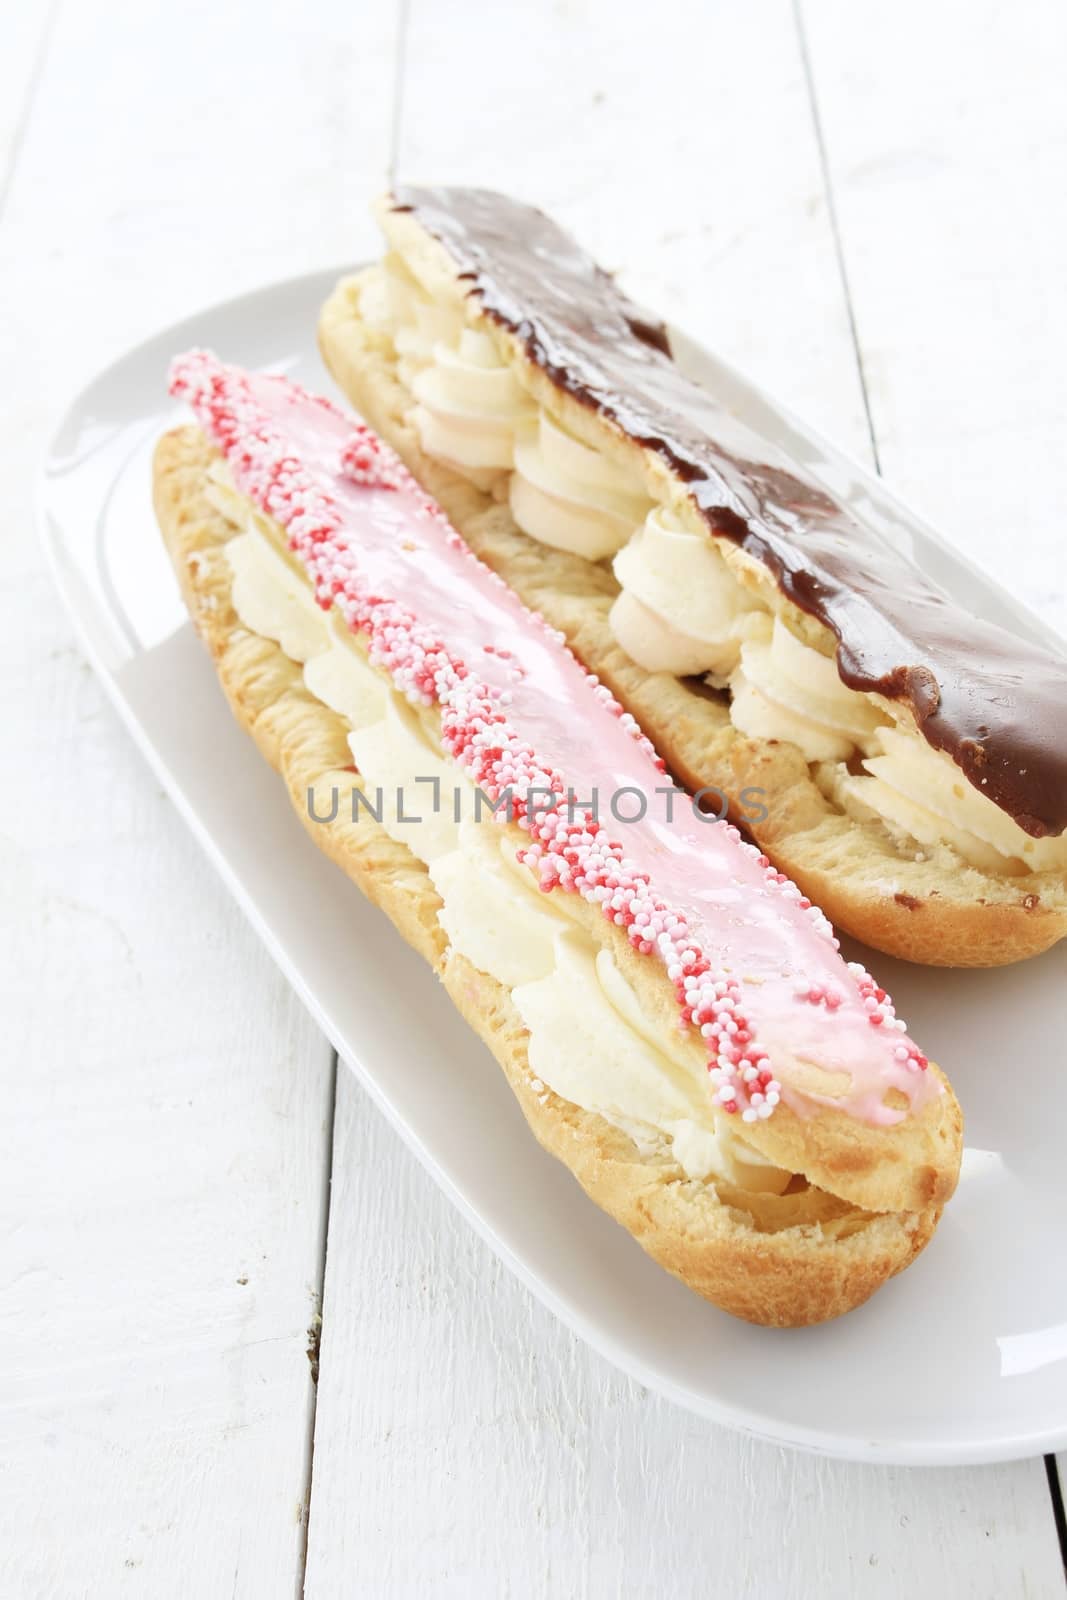 larger chocolate eclaire pastries